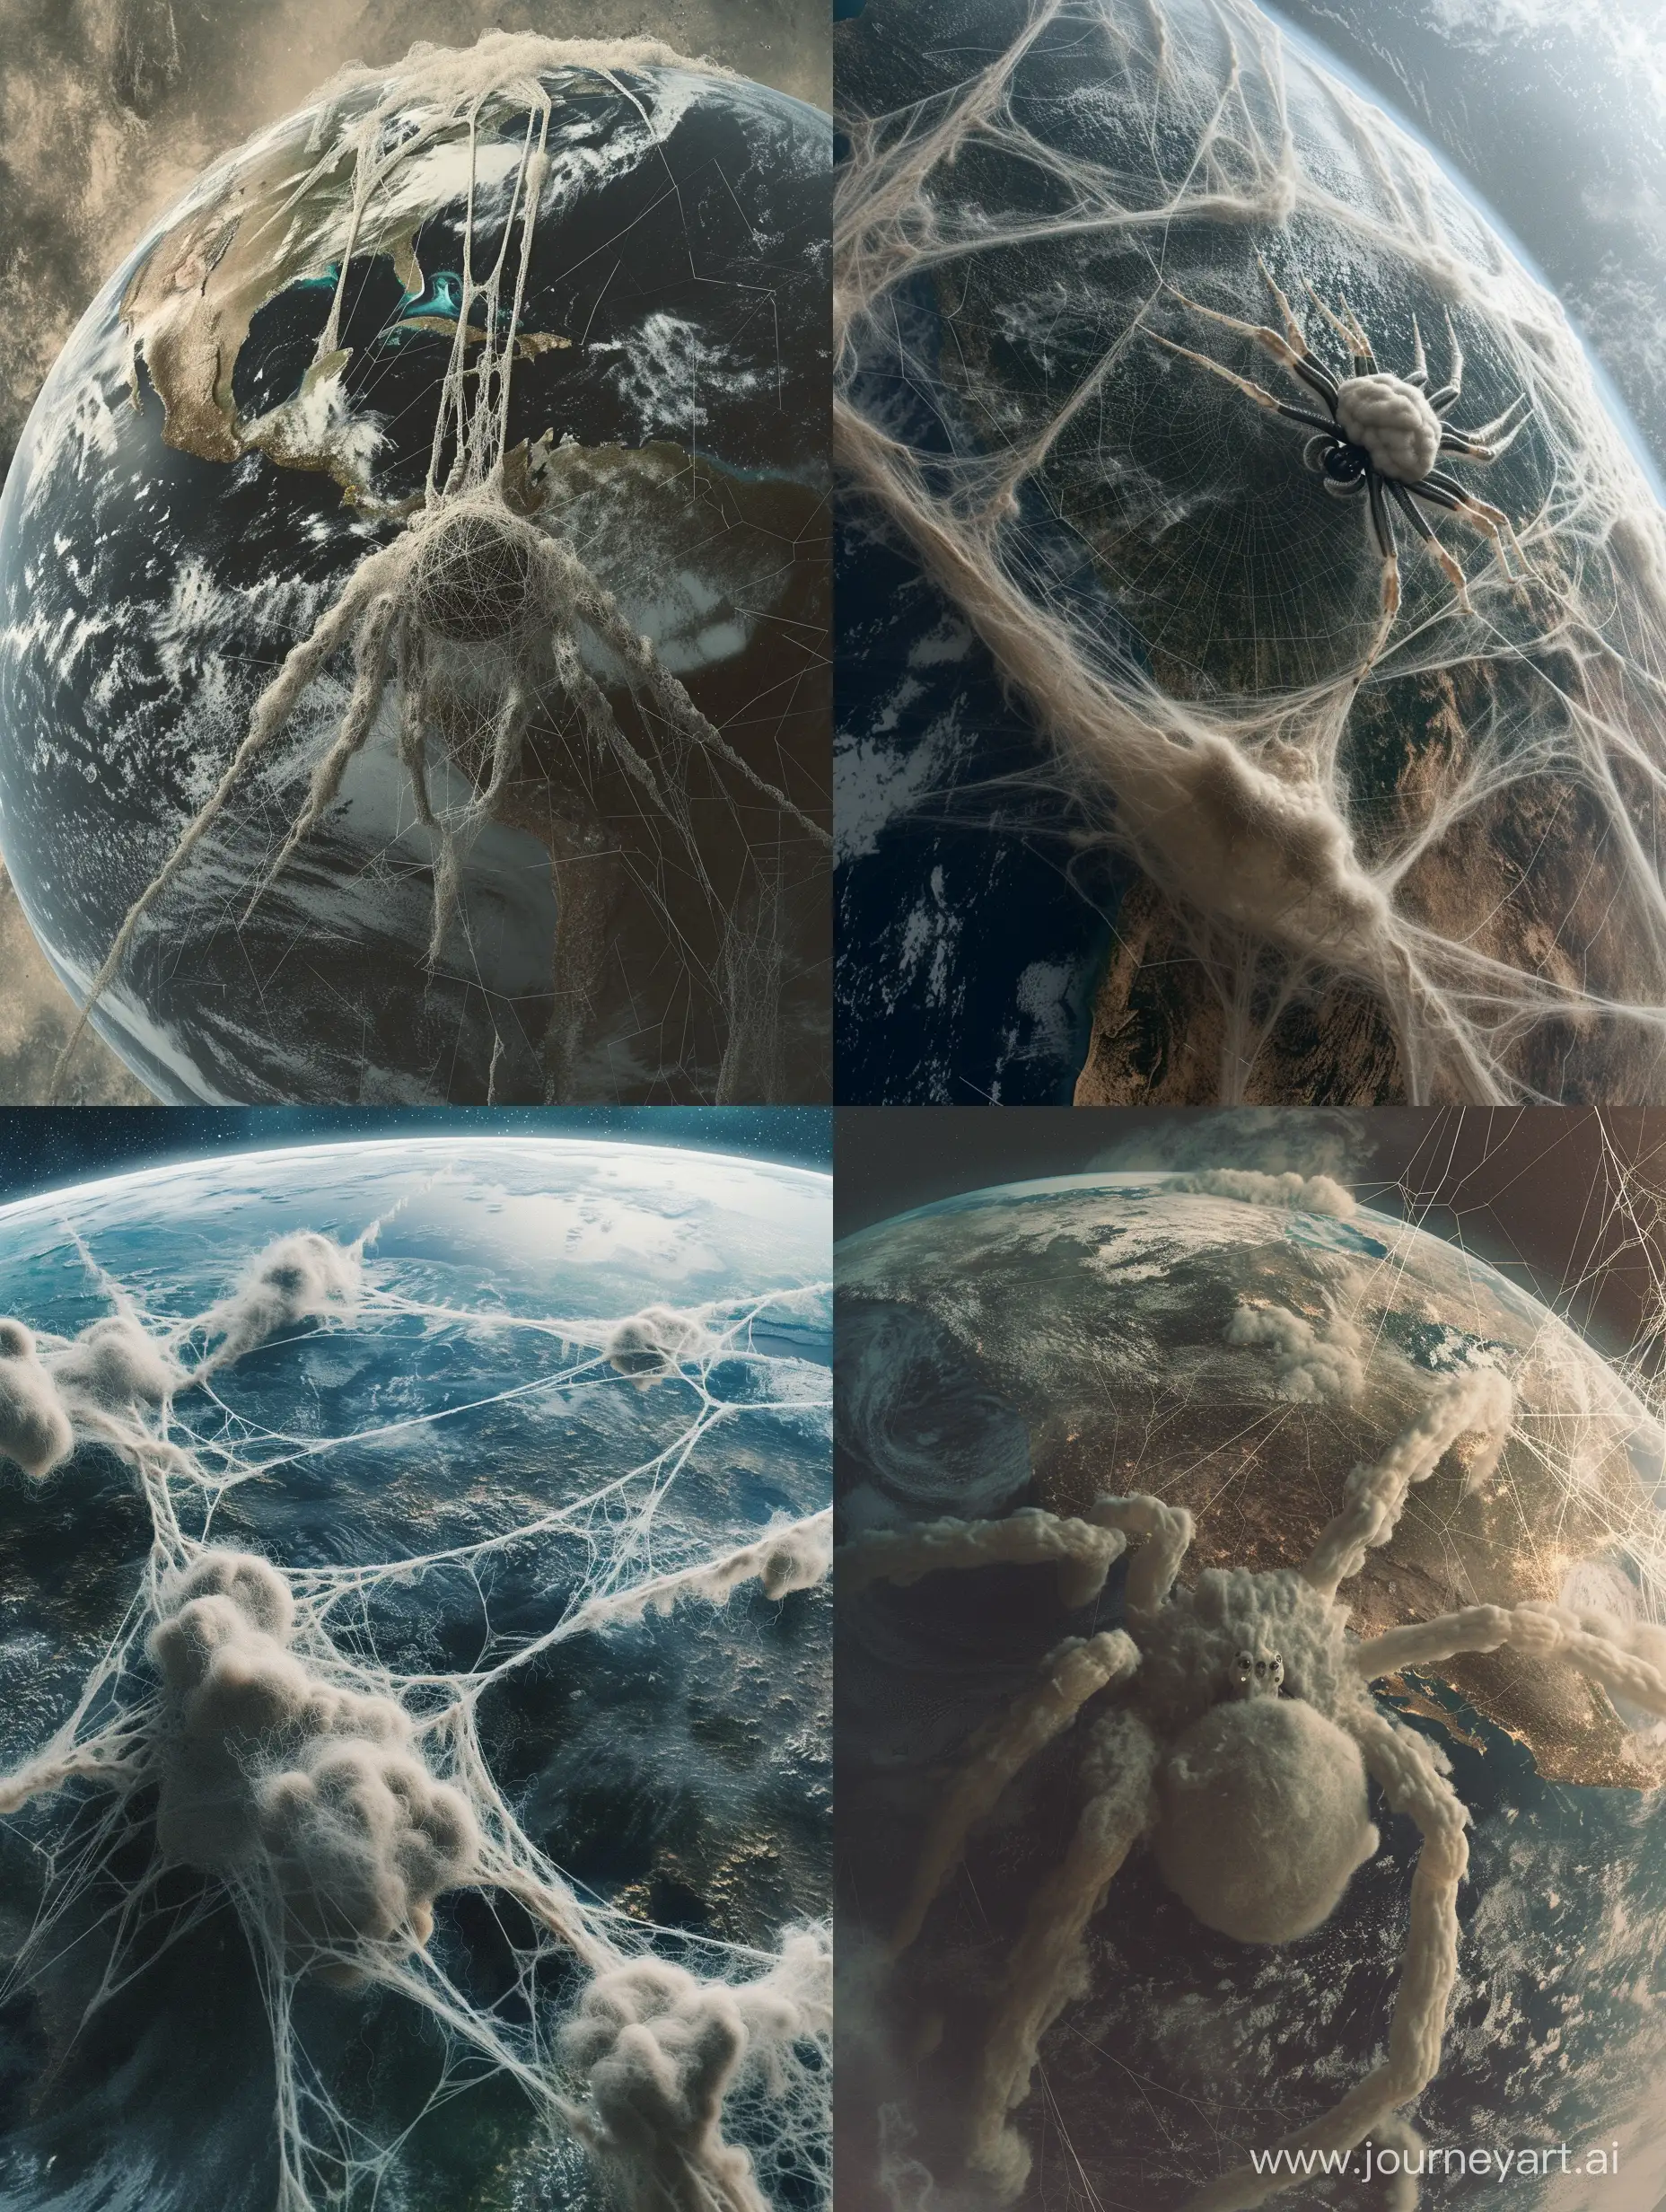 saturated photo of a satellite view from space, capturing a massive spider crawling across the entirety of planet Earth. The very far back aerial view of bird's-eye perspective satellite image offers a breathtaking view of the planet, as the spider weaves an intricate and menacing web that engulfs the Earth in its entirety. The thick cotton like strands of the spiderweb drape over the surface, with excess webbing dangling in Earth's atmosphere like ethereal tendrils. The overall scene is cloaked in a creepy, sinister, dystopian atmosphere, evoking a sense of abandonment and desolation. The color grading intensifies the eerie mood, with deep shadows and muted tones, further emphasizing the feeling that Earth has been forsaken. This captivating image serves as a haunting reminder of the spider's overpowering presence and the absence of humanity